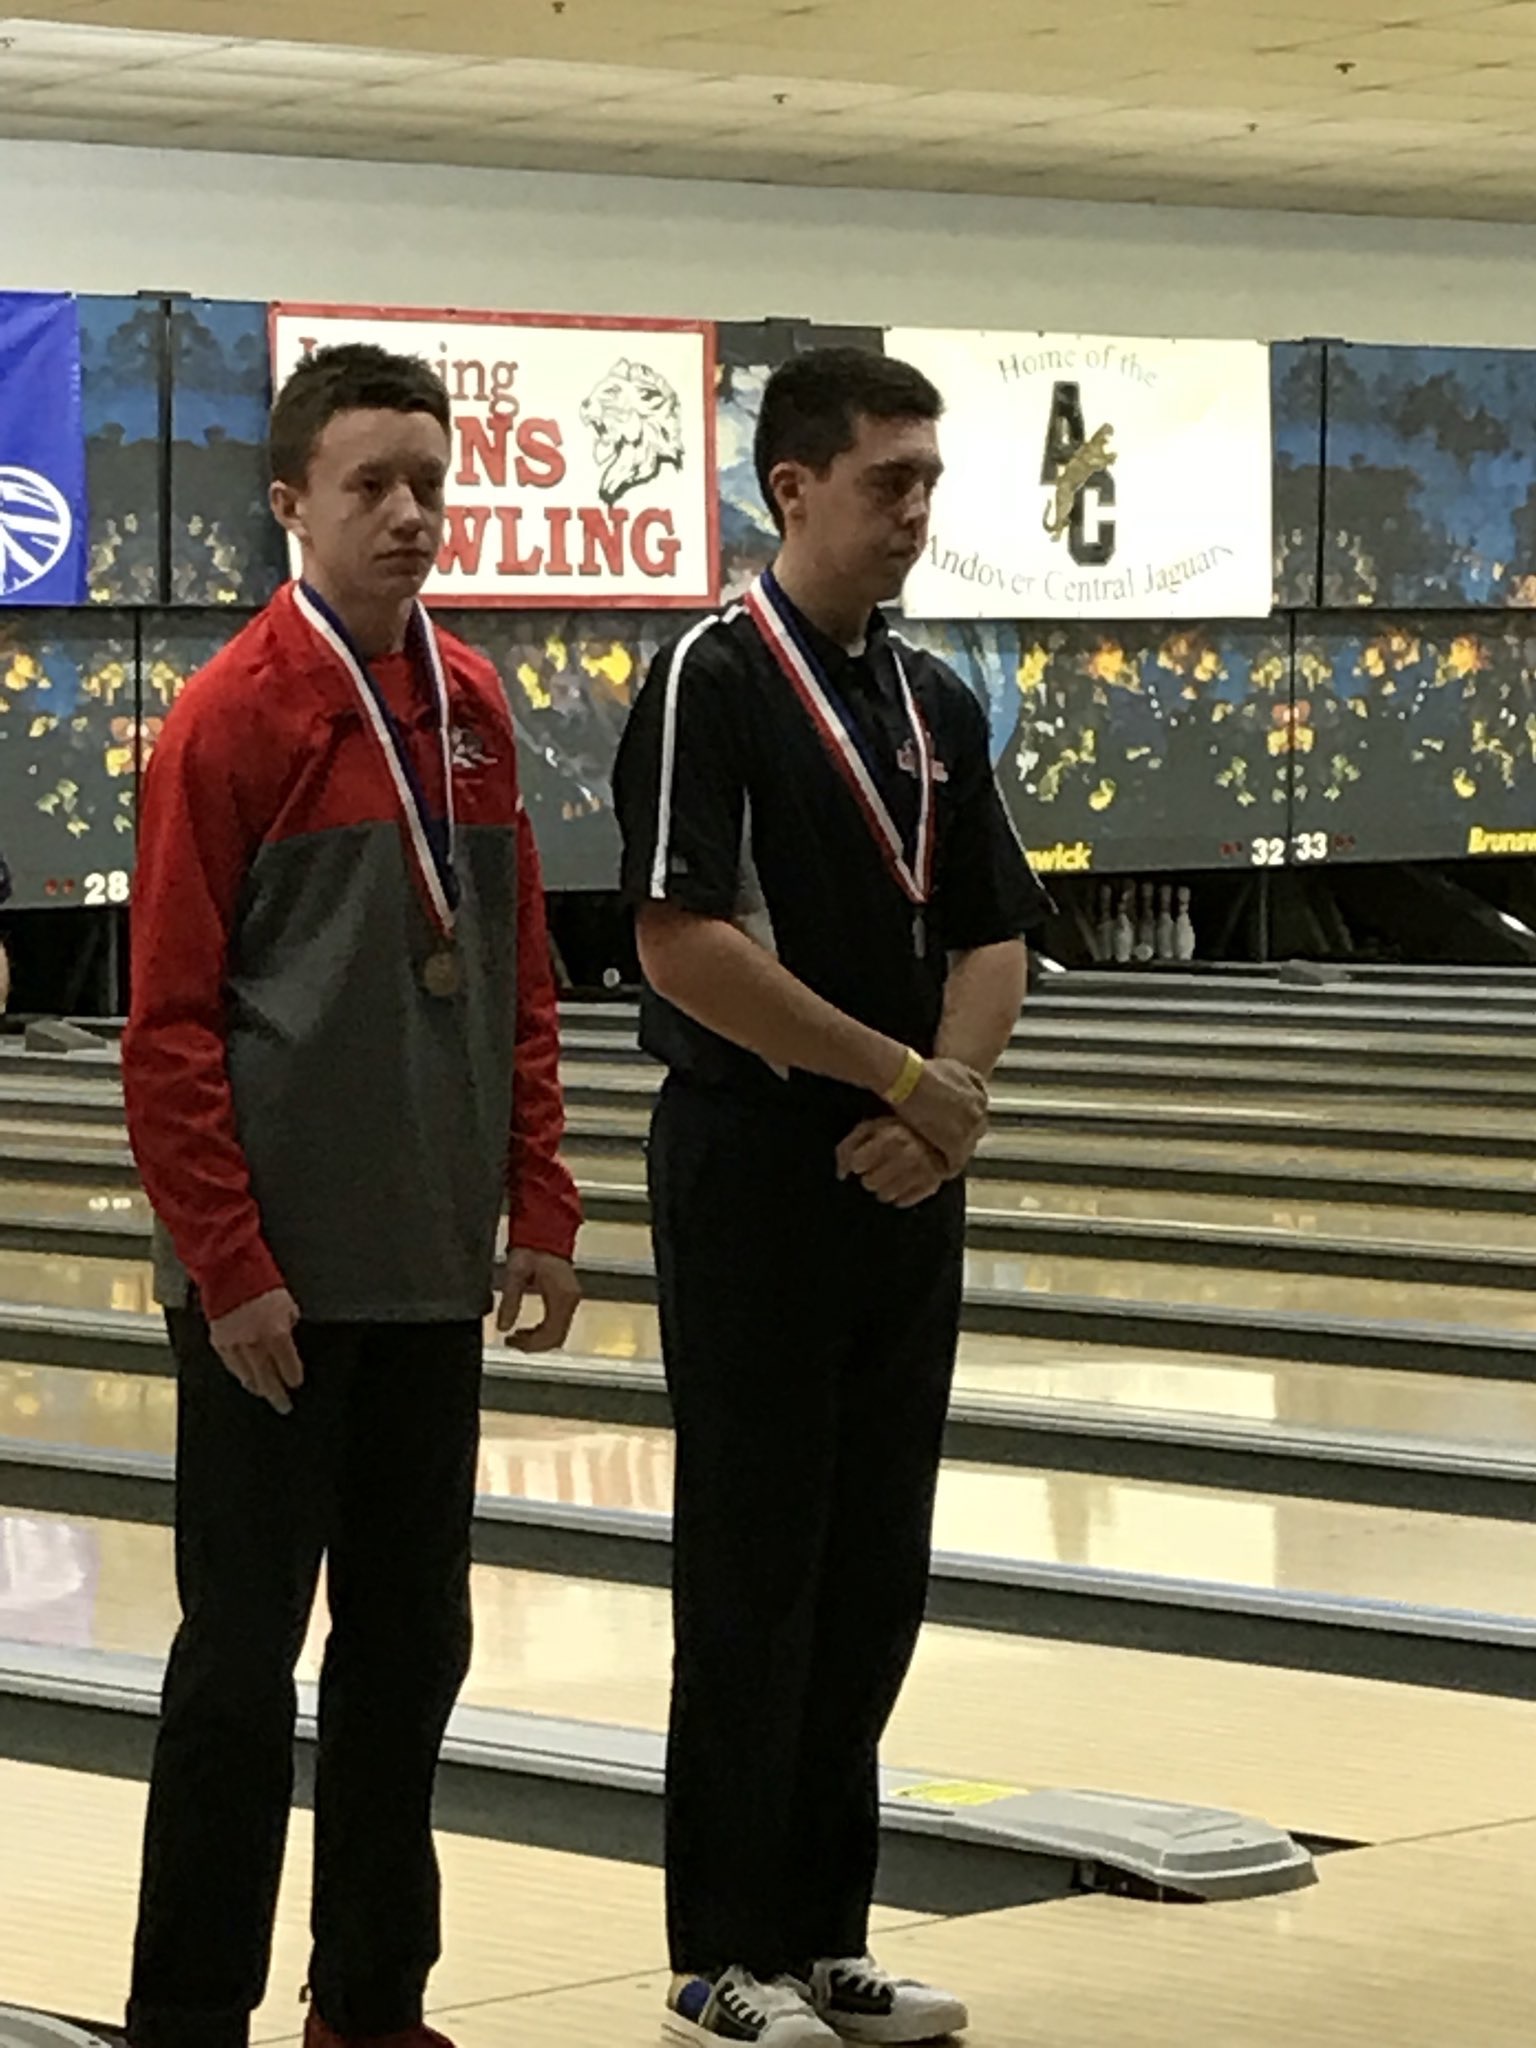 Tracey Hill Medals at State